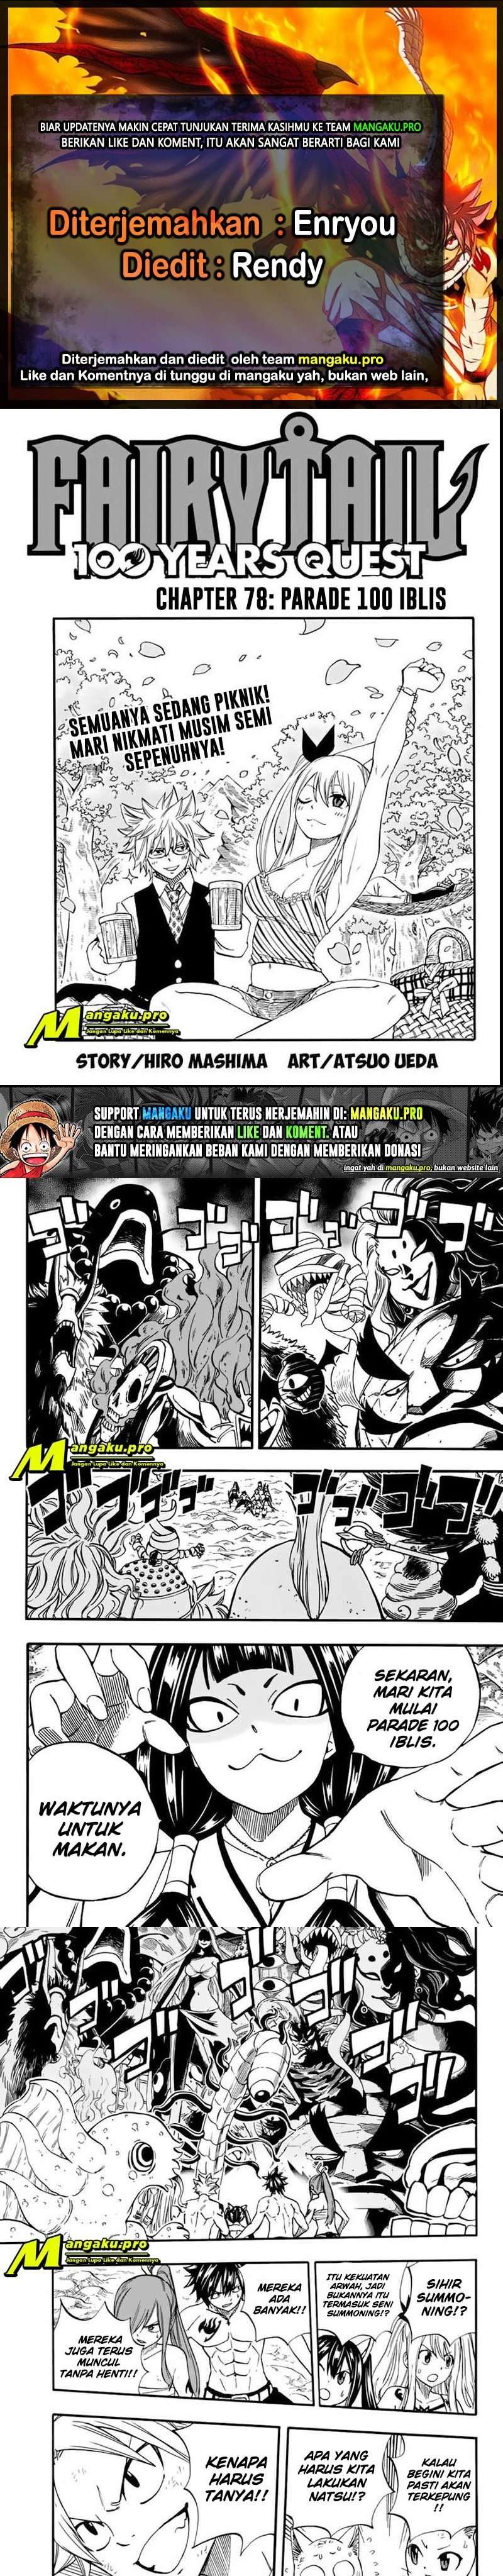 Fairy Tail: 100 Years Quest: Chapter 78 - Page 1